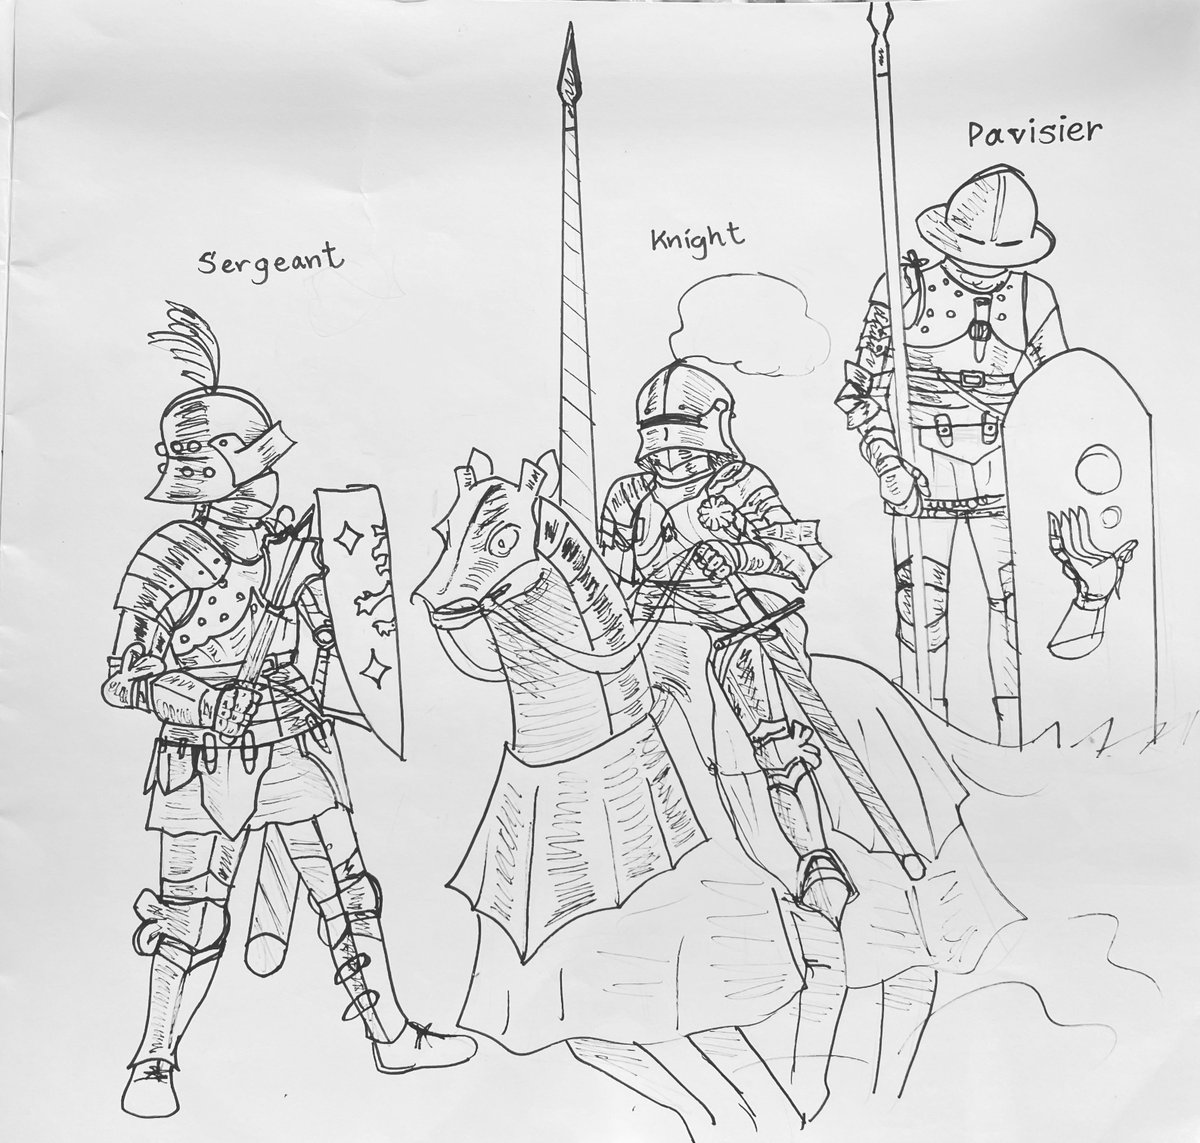 Leonaise soldiers and knight 
1. Sergeant - professional heavy infantry
2.Knight - aristocratic heavy cavalry
3. Pavisier - heavy spearman

#knight #medievalsoldier #medievalknight #medievalfantasy #fantasy #fantasyart #drawing #worldbuilding